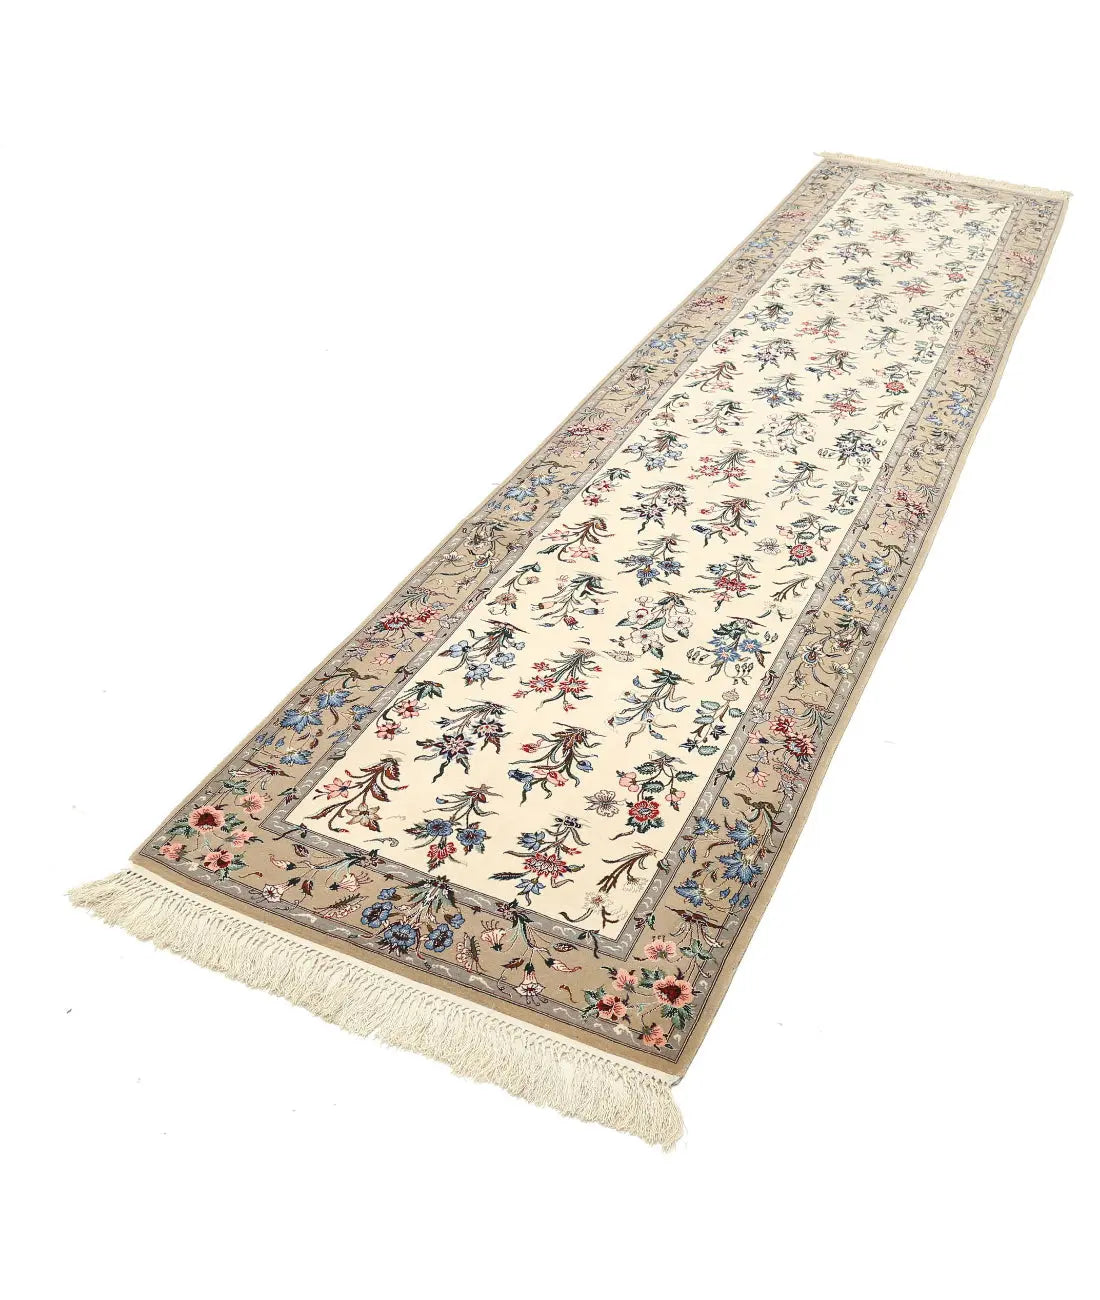 Hand Knotted Antique Masterpiece Persian Isfahan Wool & Silk Rug - 2'9'' x 11'7'' - Arteverk Rugs Area rug